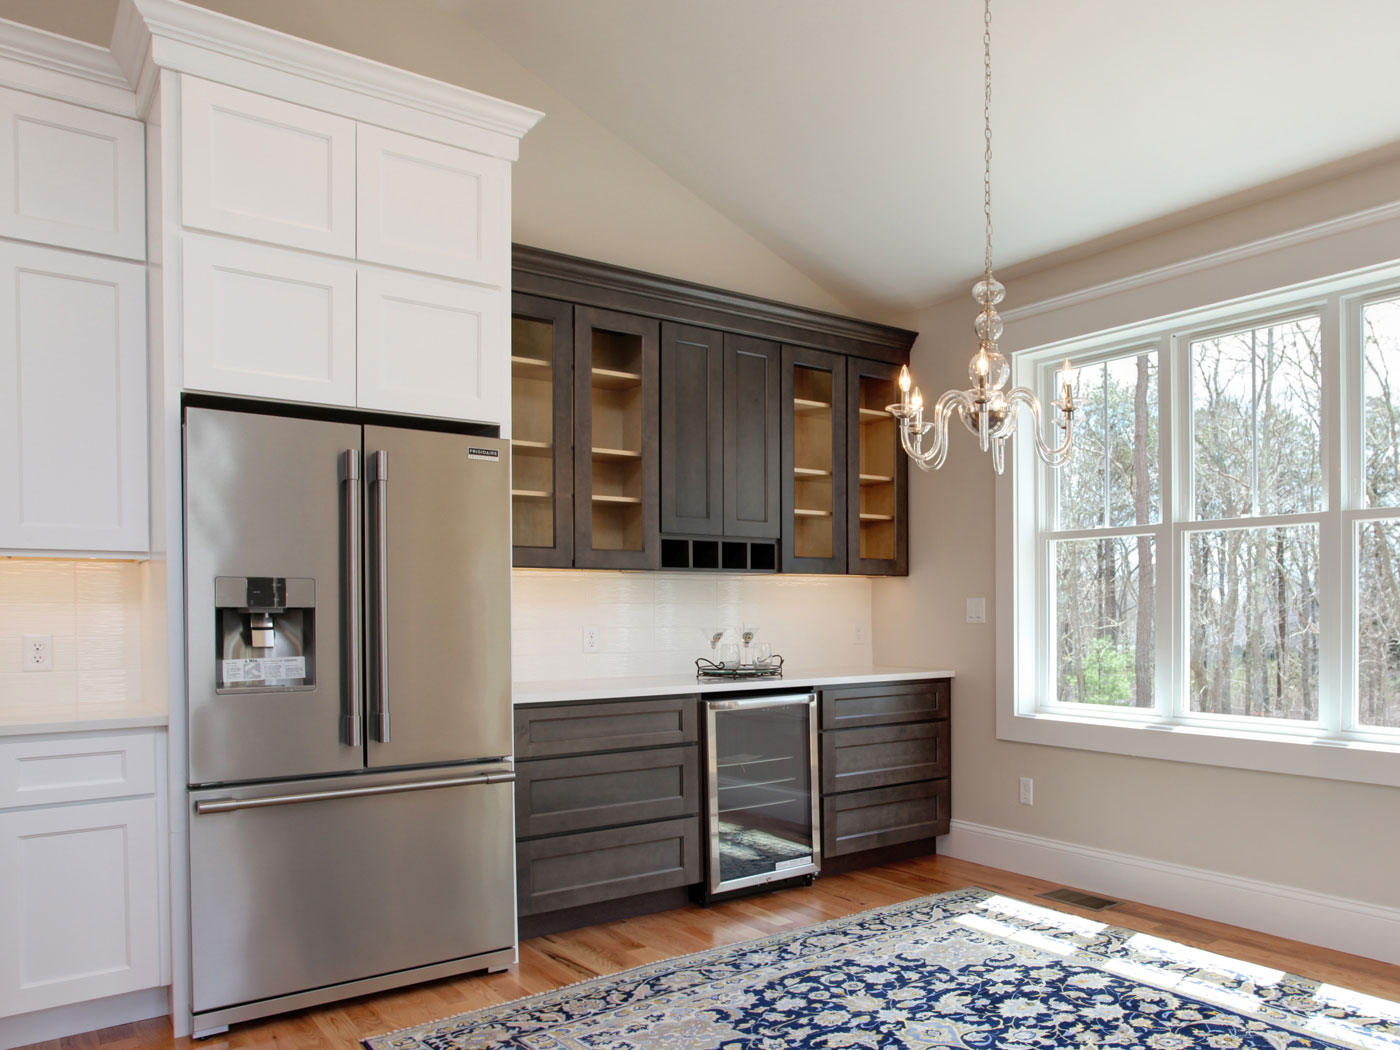 Standard Kitchen Cabinets Brooklyn White and Slate - Craftworks Custom Cabinetry